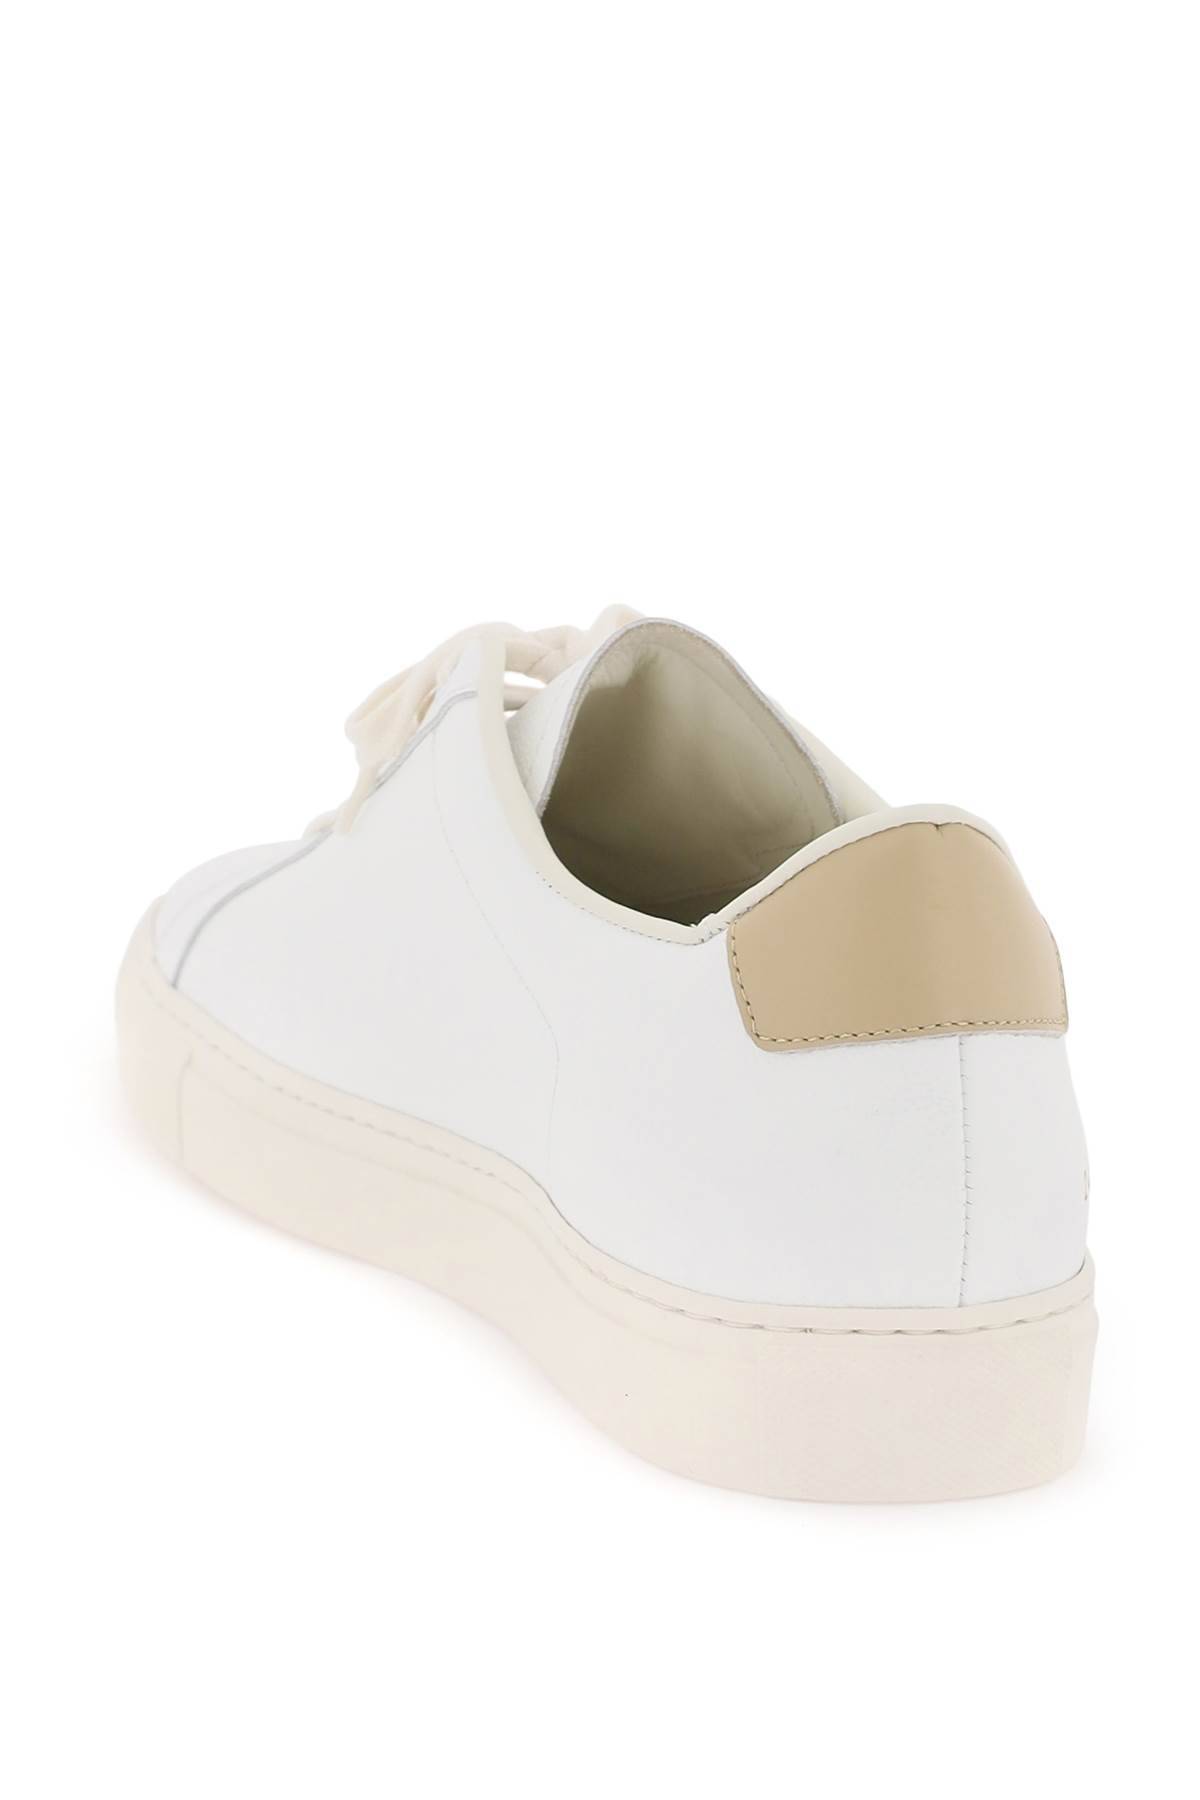 Shop Common Projects Retro Low Top Sne In White,beige